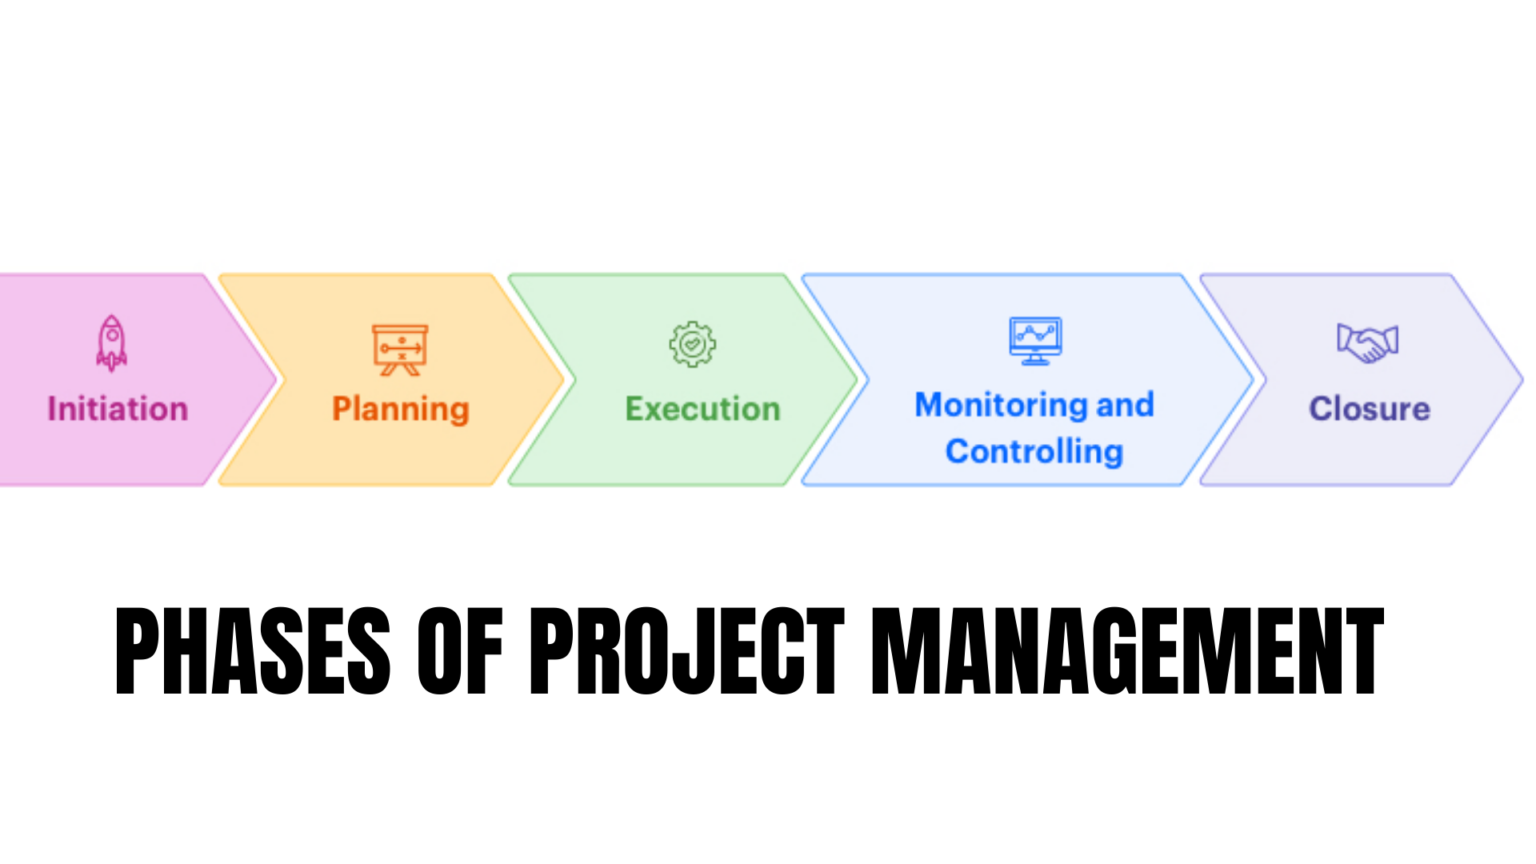 Let us look at the various phases that a Project Management Job demands.